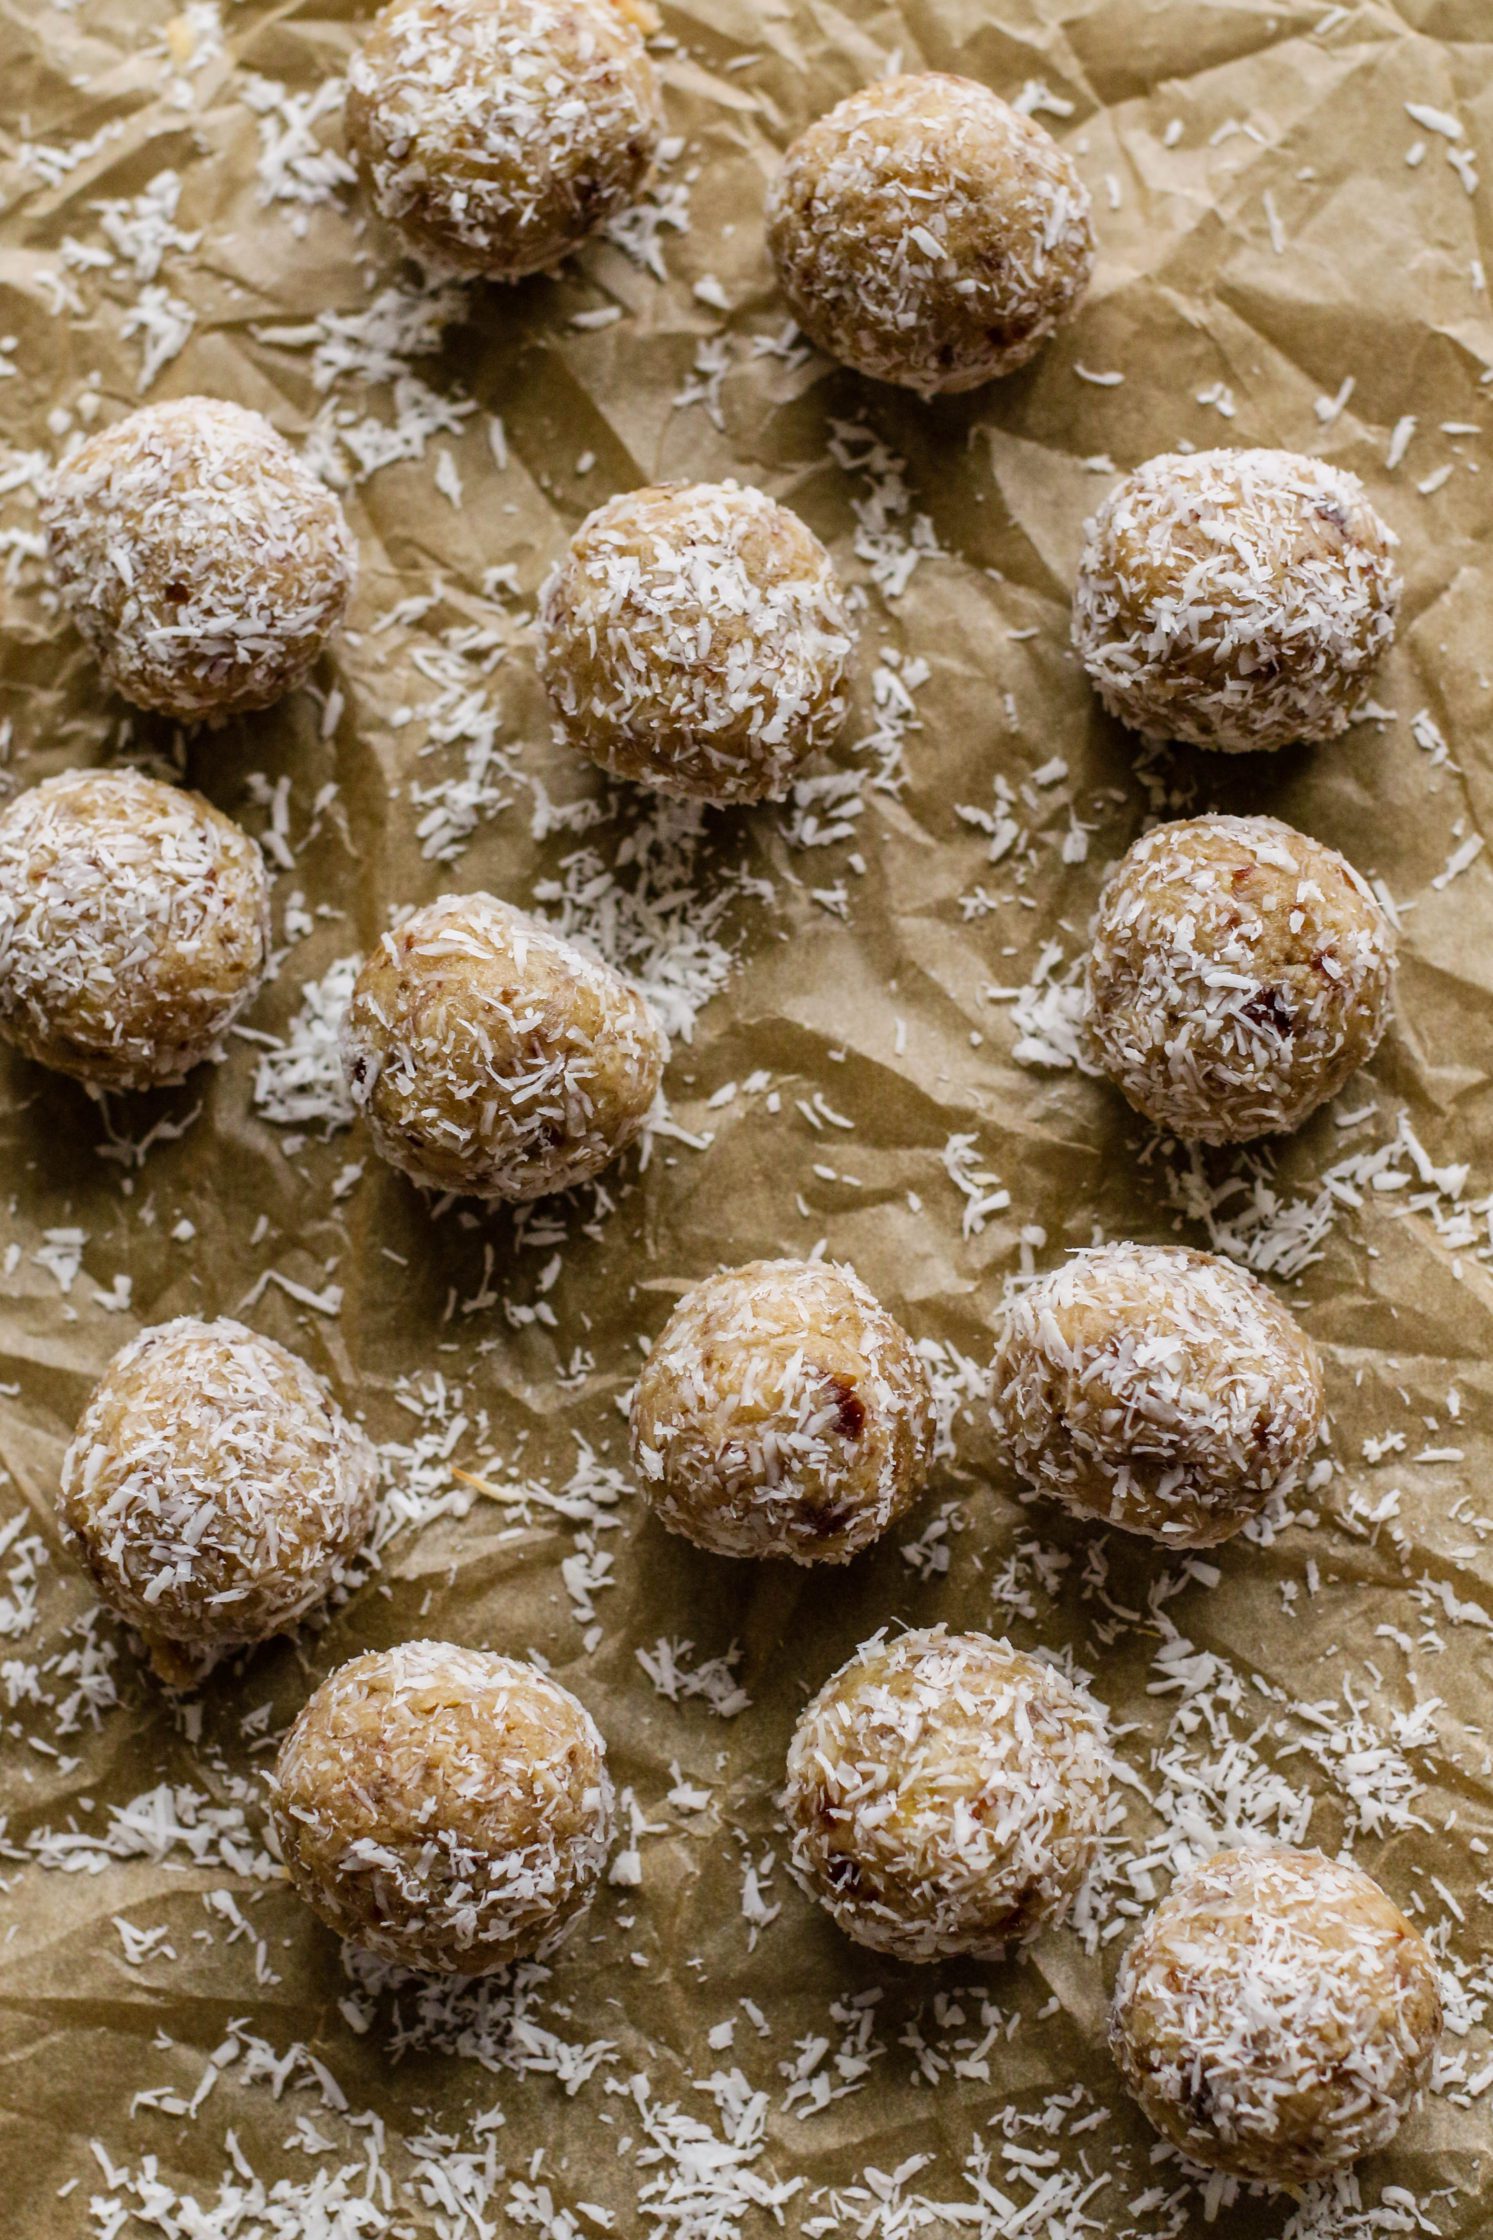 Coconut Cashew Cookie-Dough "Snowballs" served on parchment paper with shredded coconut by Flora & Vino